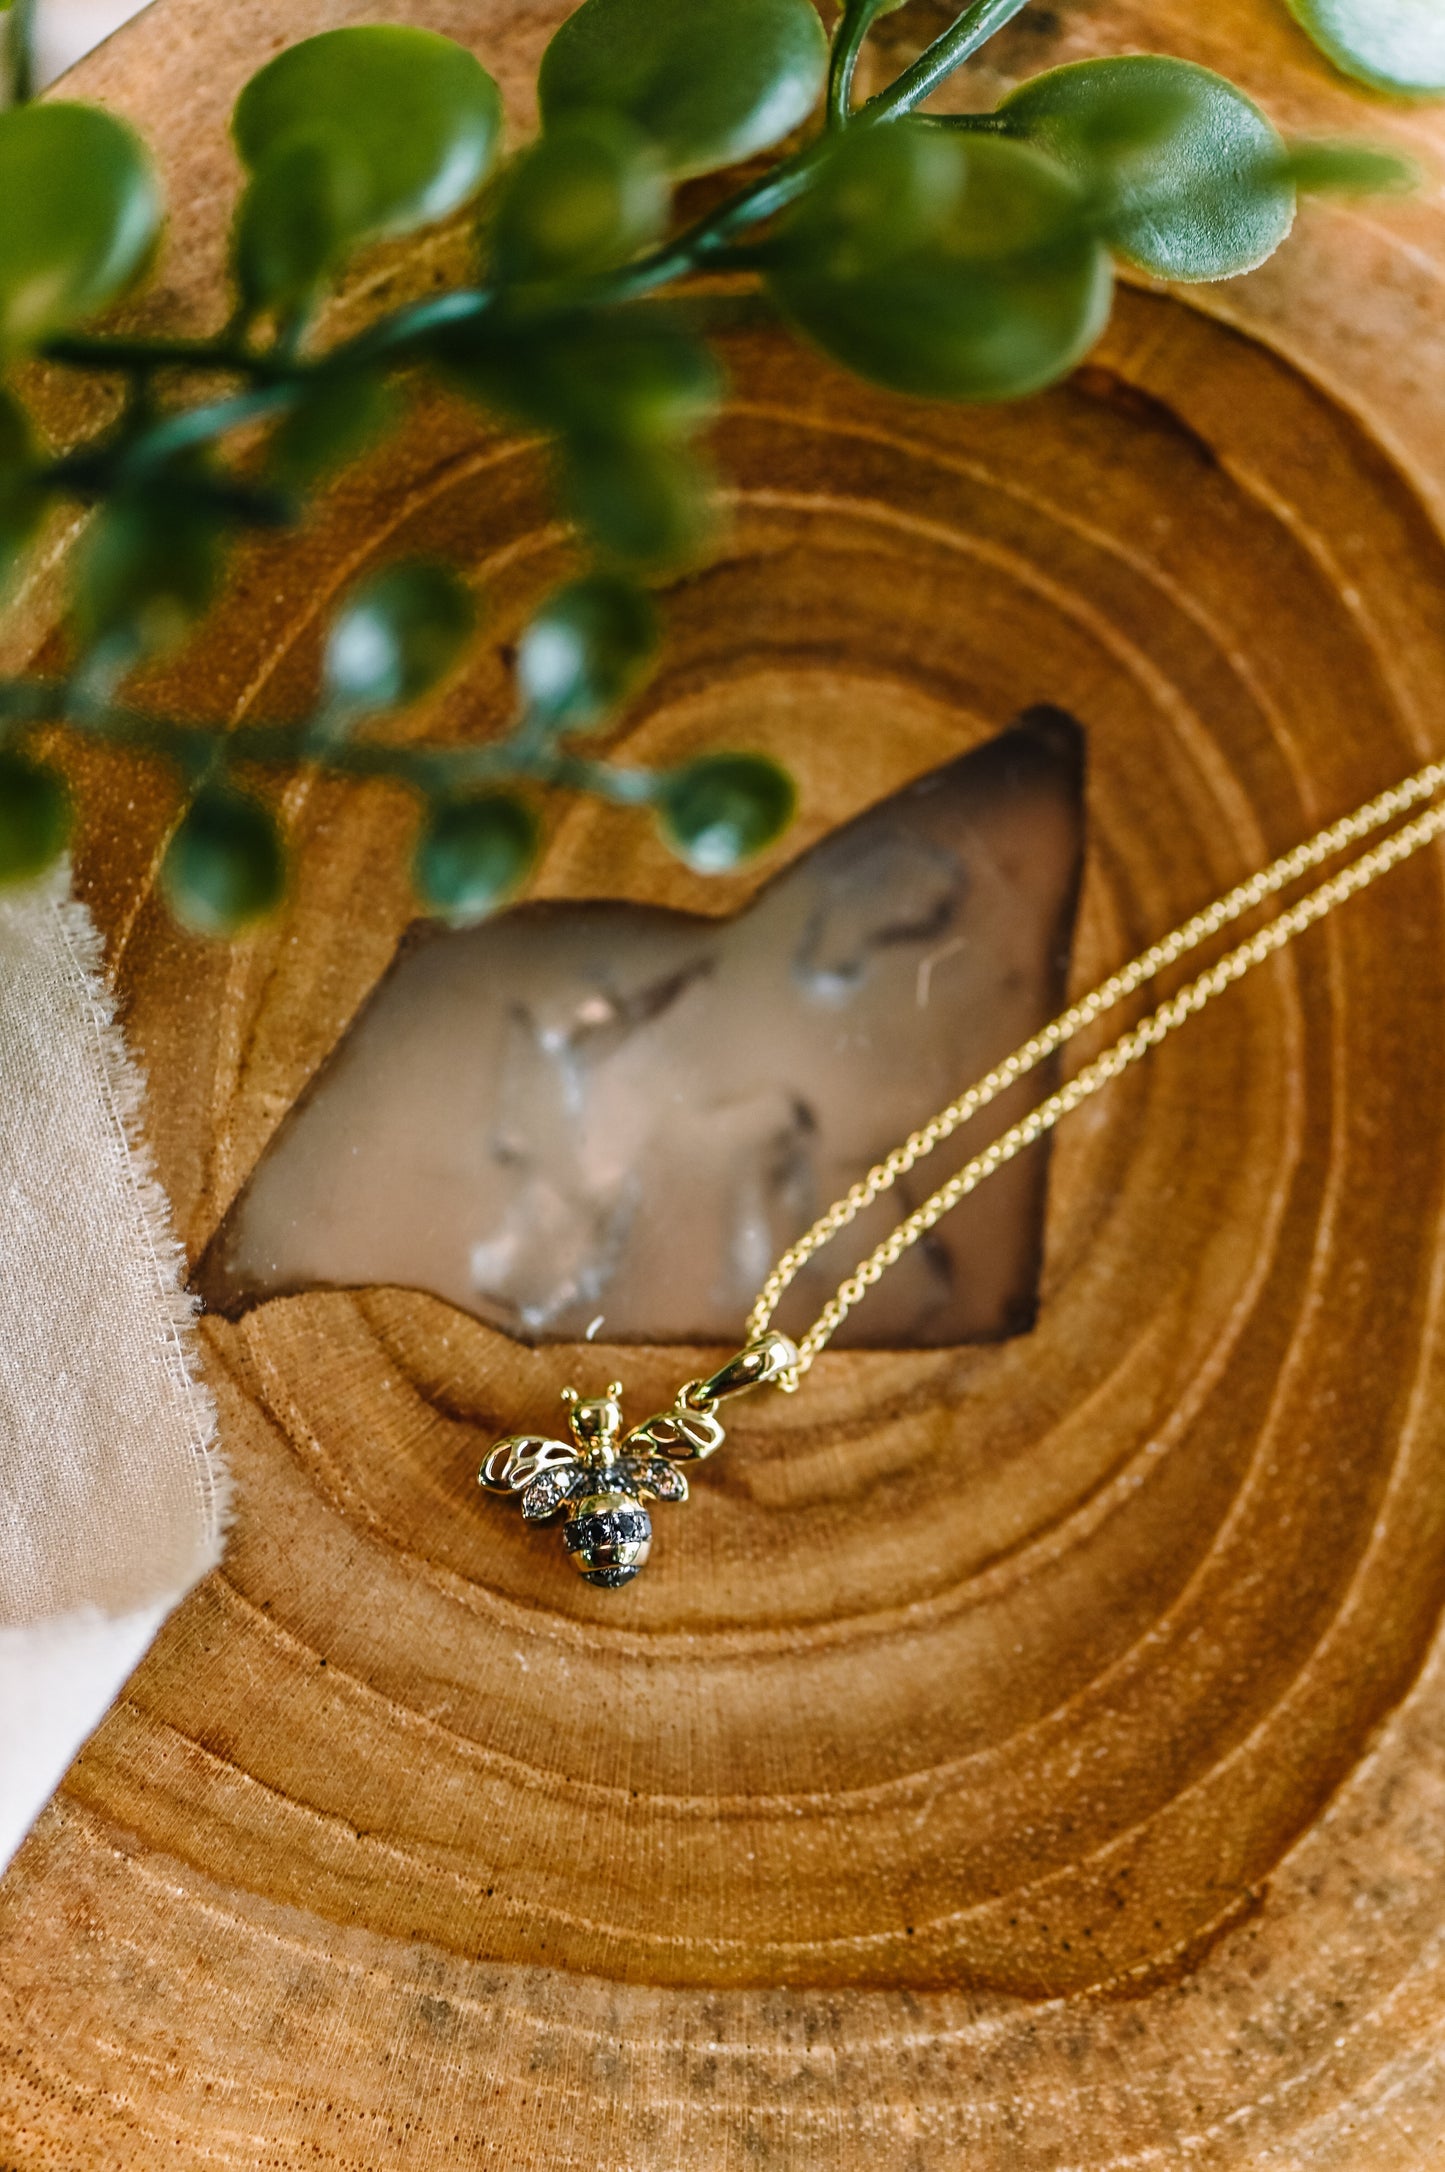 The Golden Bee Necklace